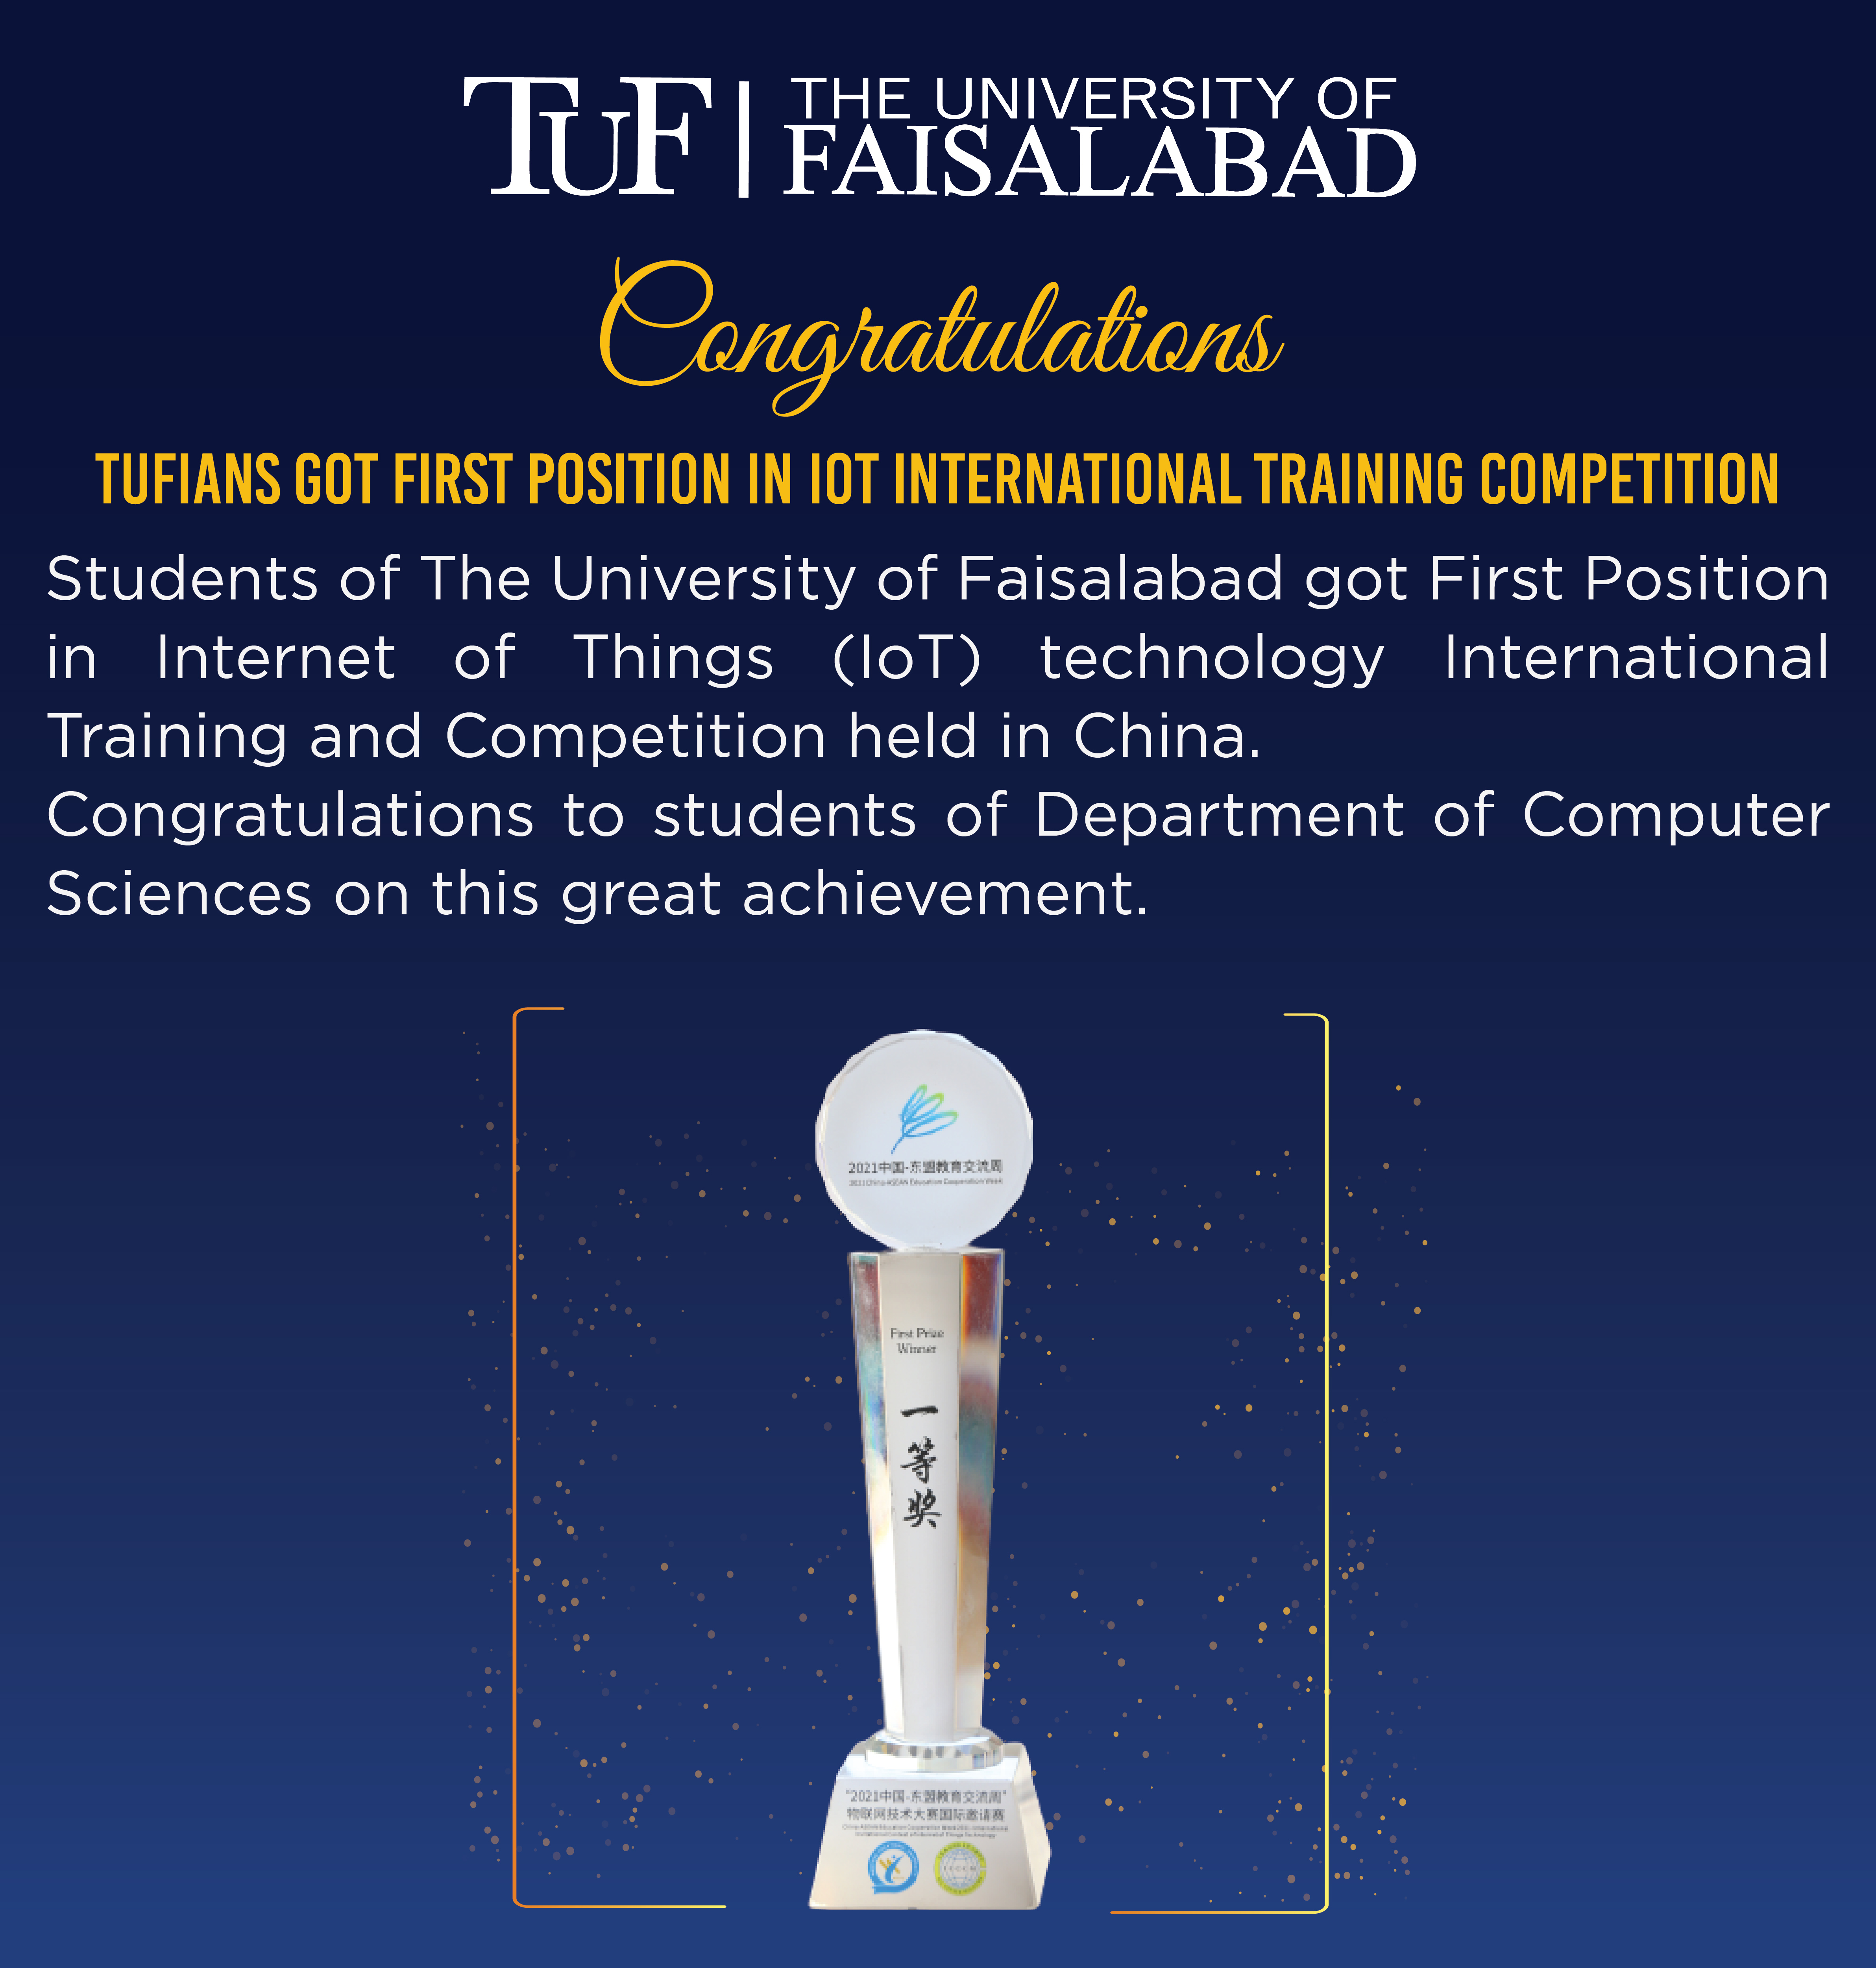 Students of The University of Faisalabad got First Position in internet of things technology (IoT) International Training and Competition held in China. Congratulations to students of Department of Computer Sciences on this great achievement.